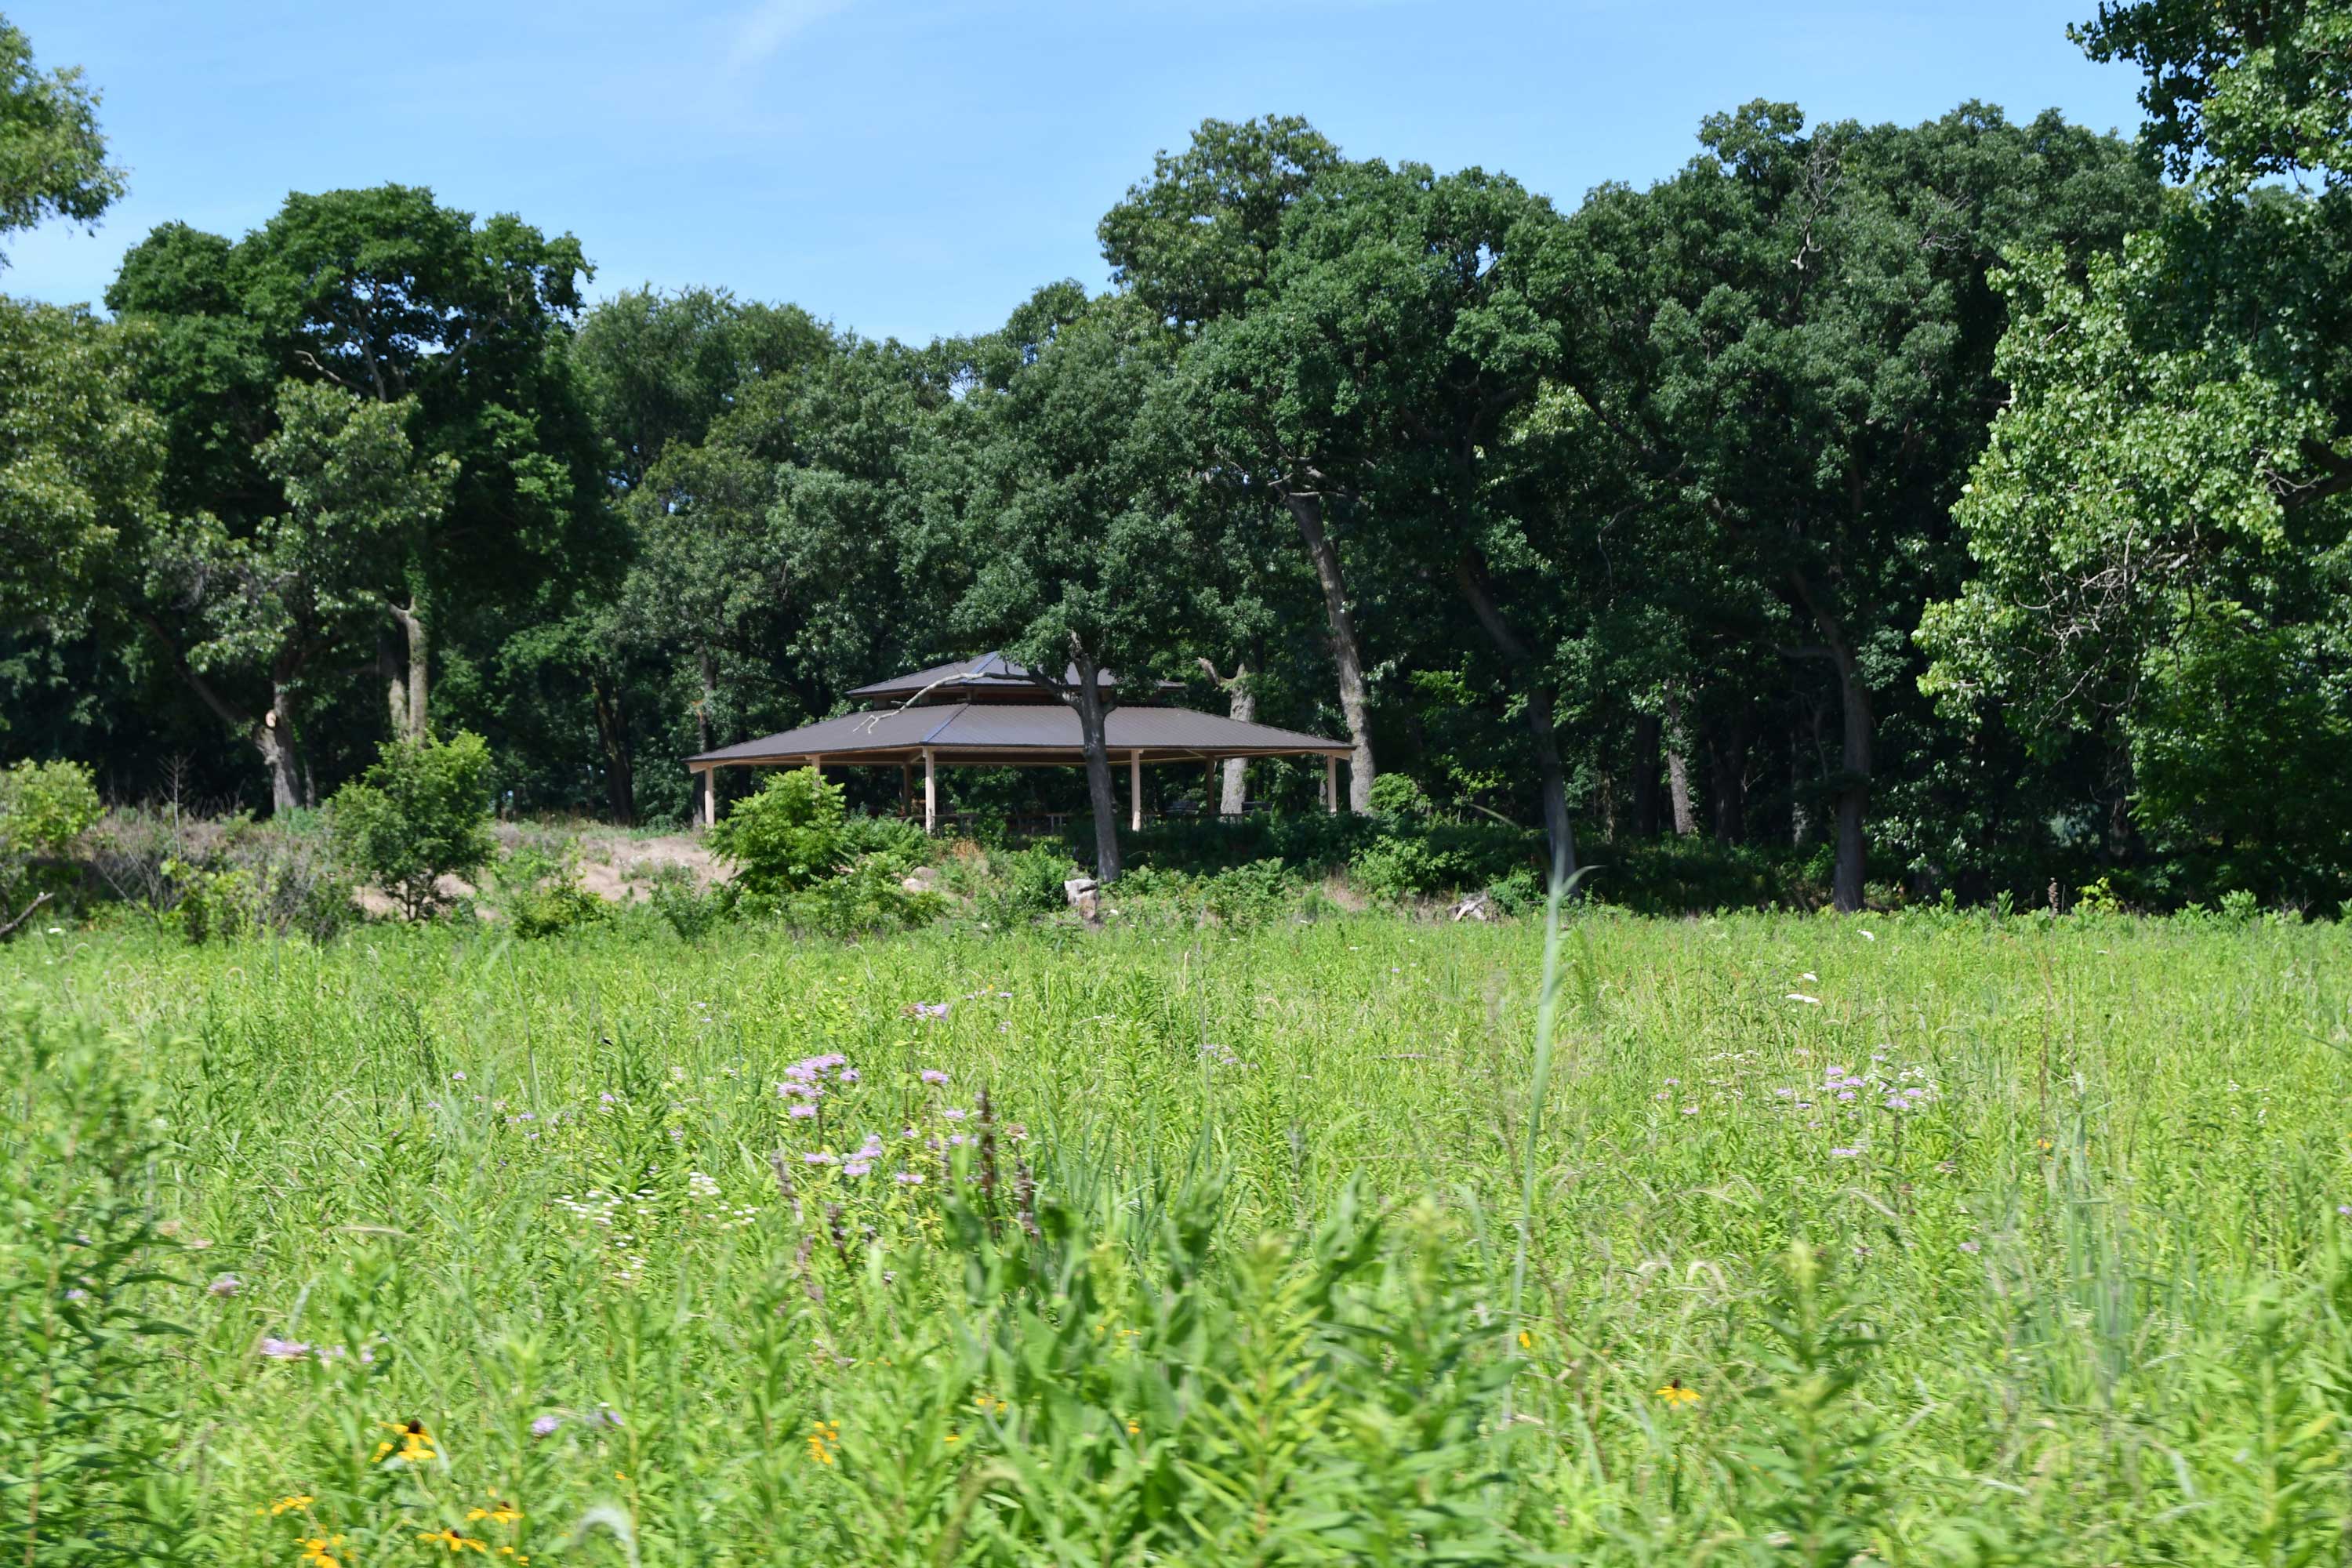 A view of the picnic shelter at KankaKee Sands Preserve.